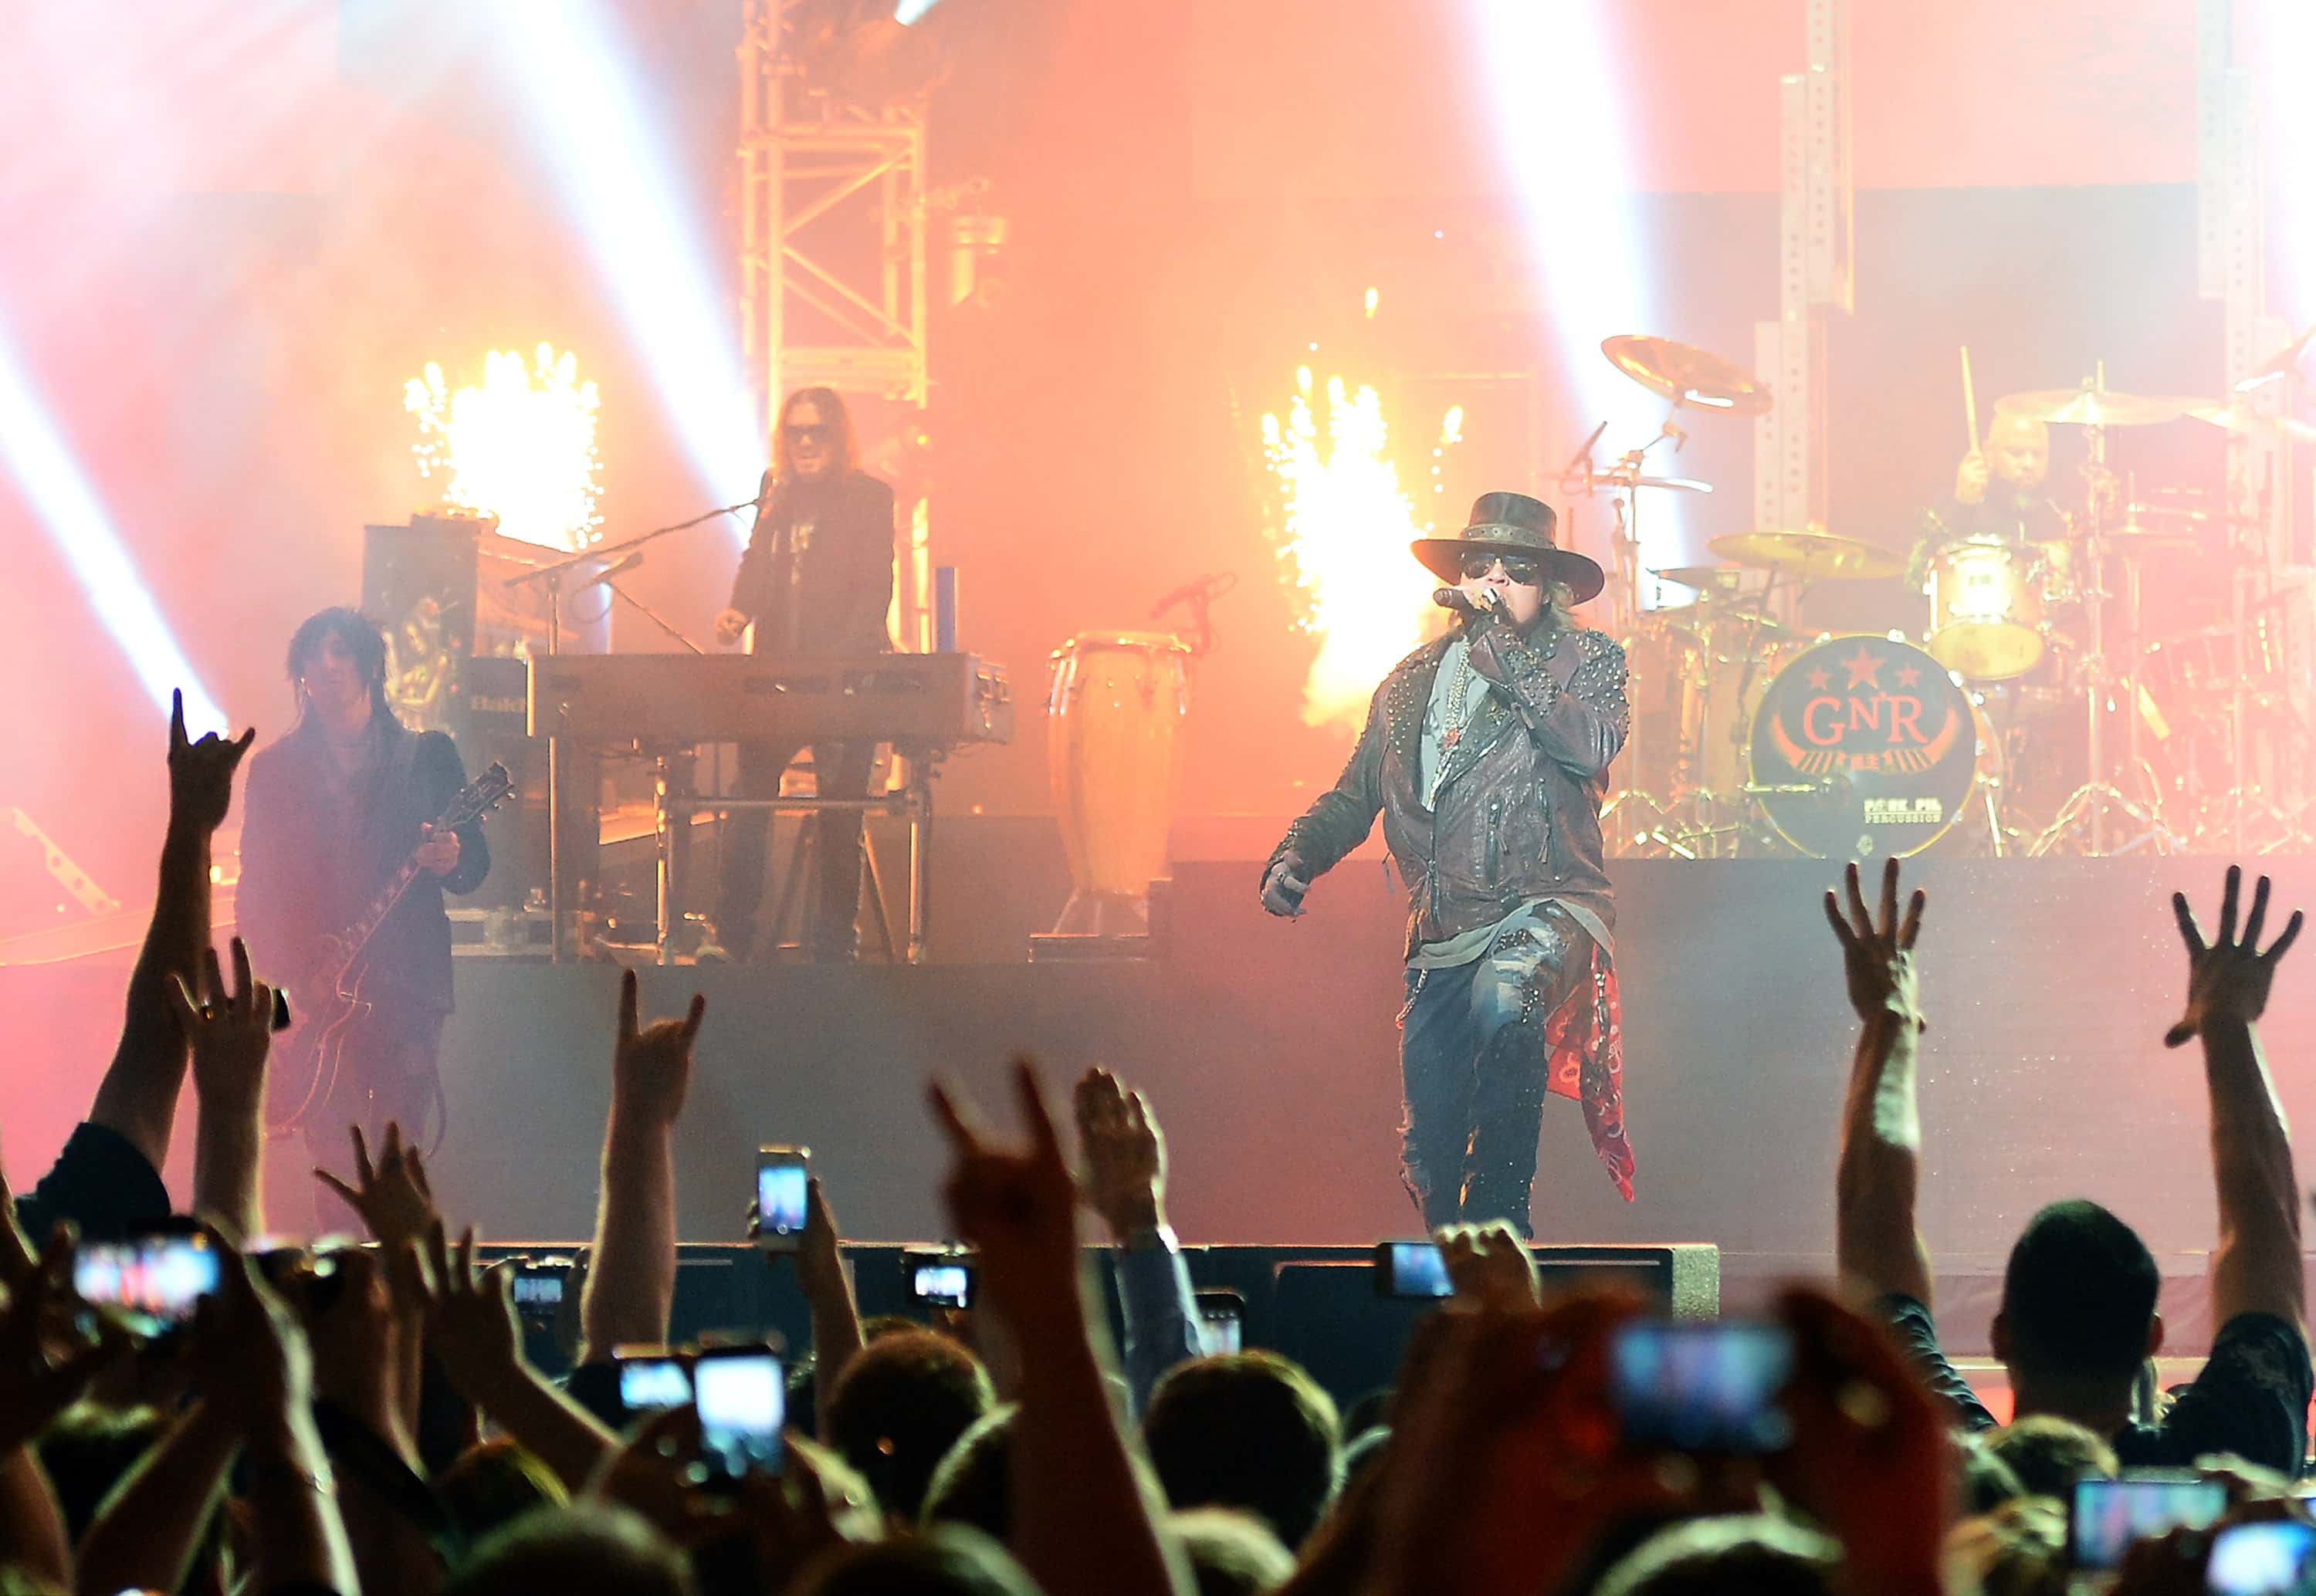 <p>By the 2010s, Guns N’ Roses’ reputation for delaying or even abruptly canceling their concerts was at an all-time low. However, in 2016, classic band members Slash and Duff McKagan reunited with the band at T-Mobile Arena in Las Vegas. They went on to perform the <em>Not in This Lifetime</em> tour, which grossed over $480 million. That makes it the fourth highest grossing concert tour of all time!</p>